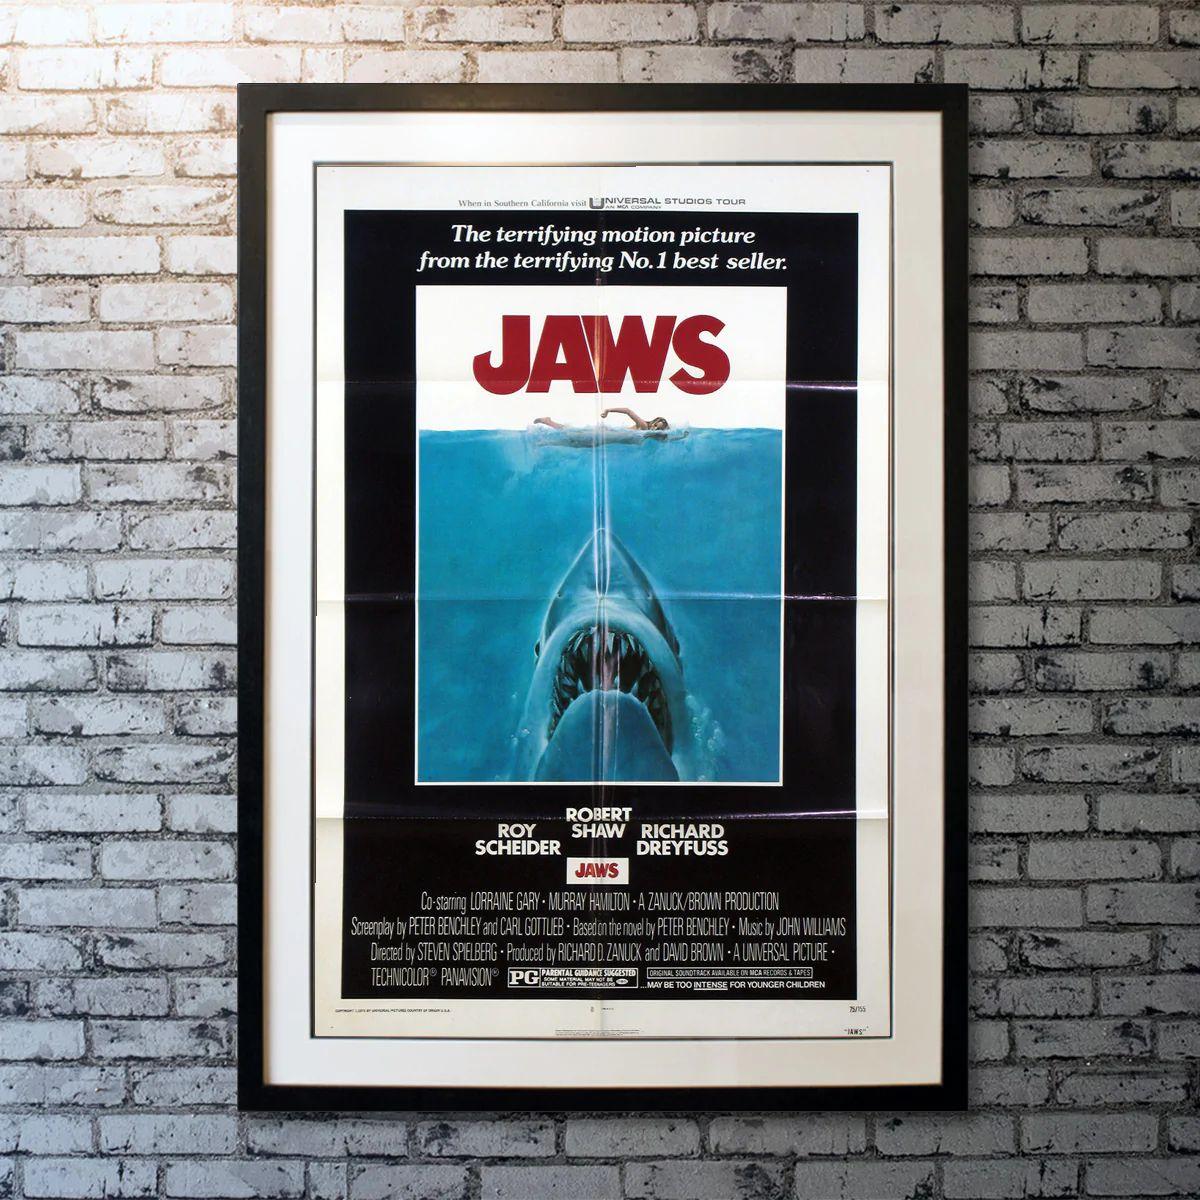 Jaws, Unframed Poster, 1975

Original One Sheet (27 X 41 Inches). This is a very rare 1975 original National Screen Service US One Sheet (domestic version) with the domestic PG-Rating Box.  Jaws invented the summer blockbuster and was a massive hit